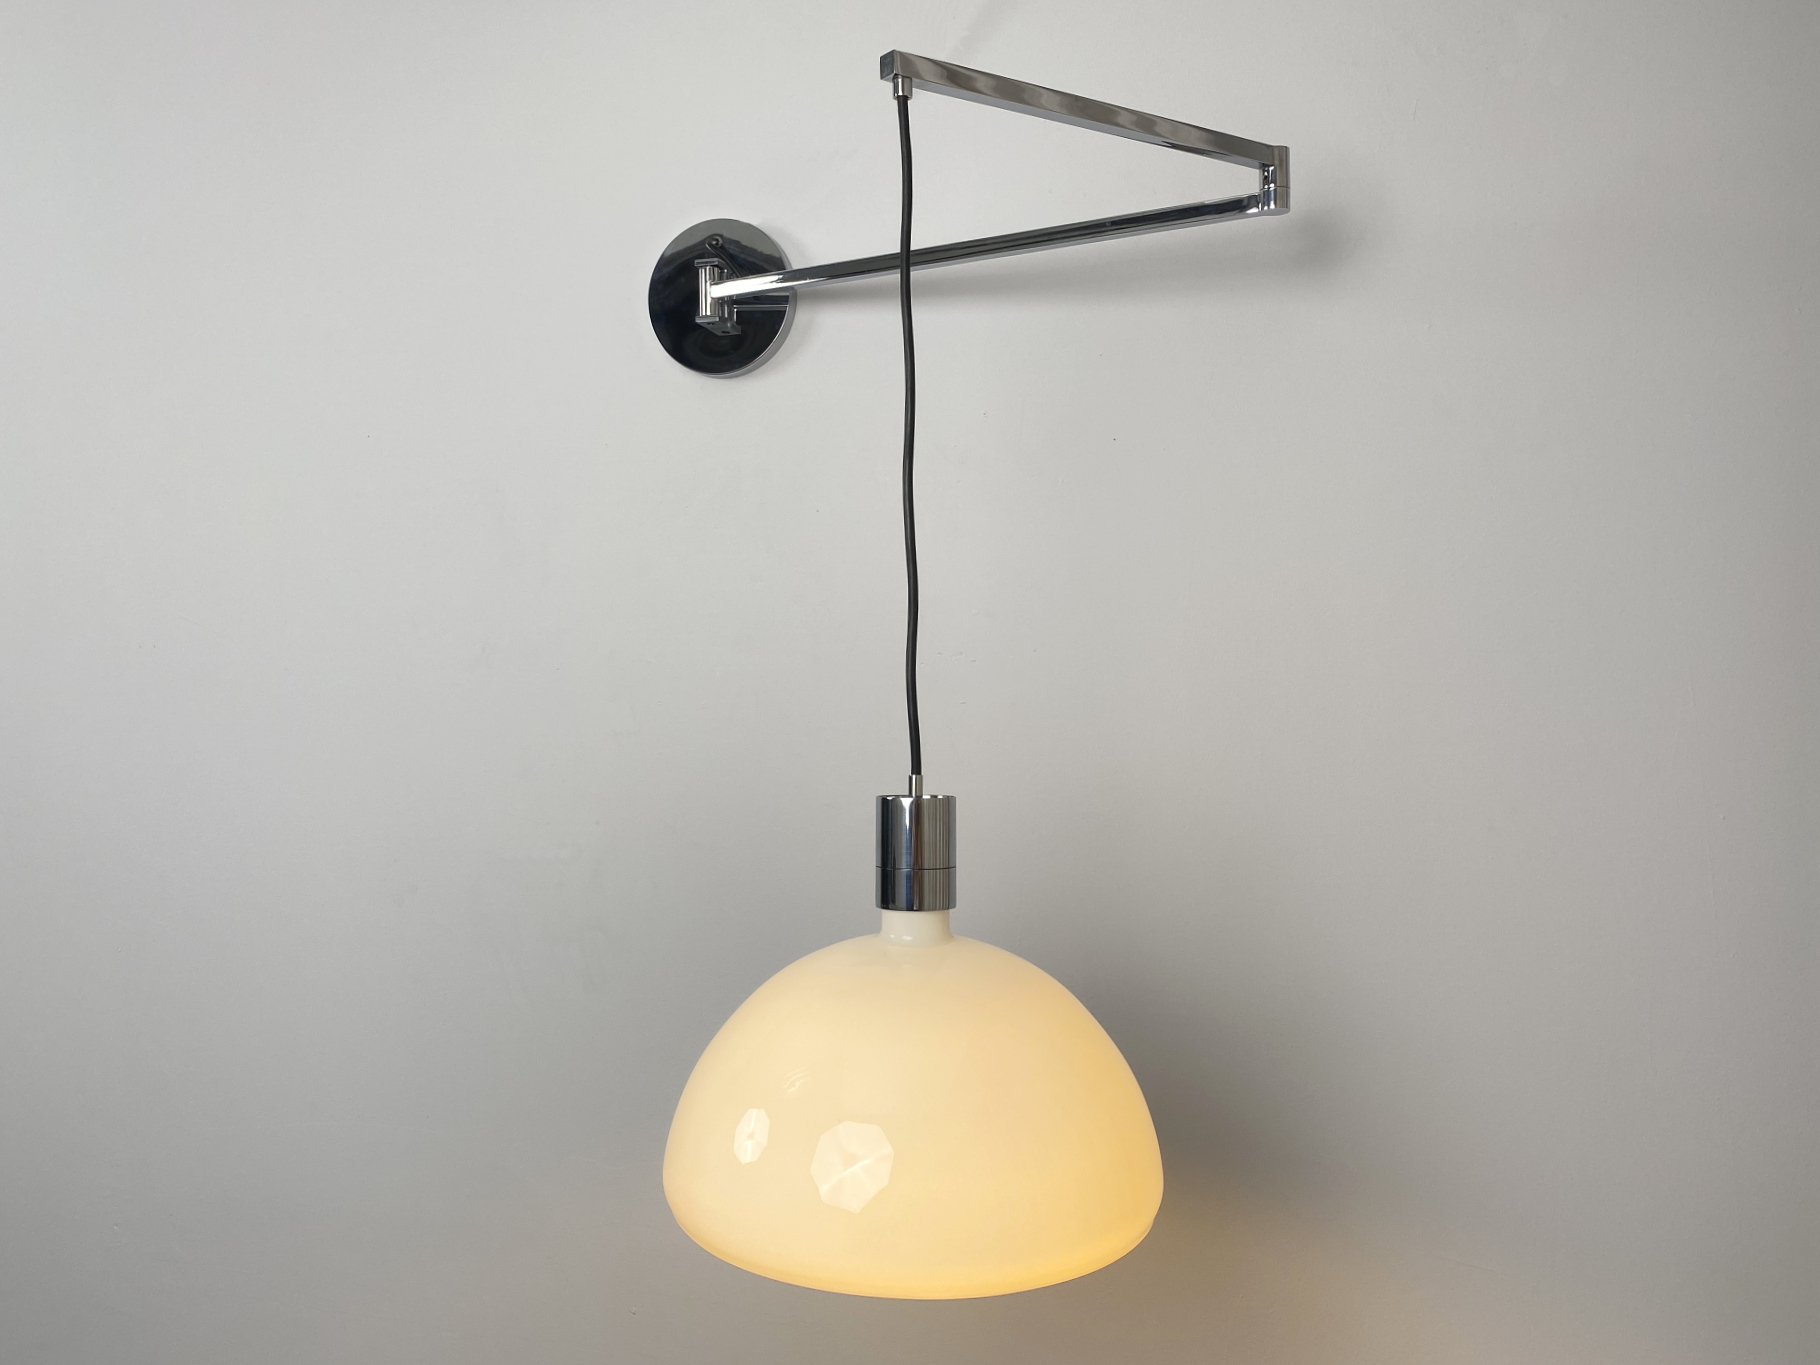 Wall Lamp with Swivel Arm by Franco Albini, Franca Helg and Antonio Piva for Sirrah, Italy, 1960s. Chromed Wall Bracket with frosted Glass Shade